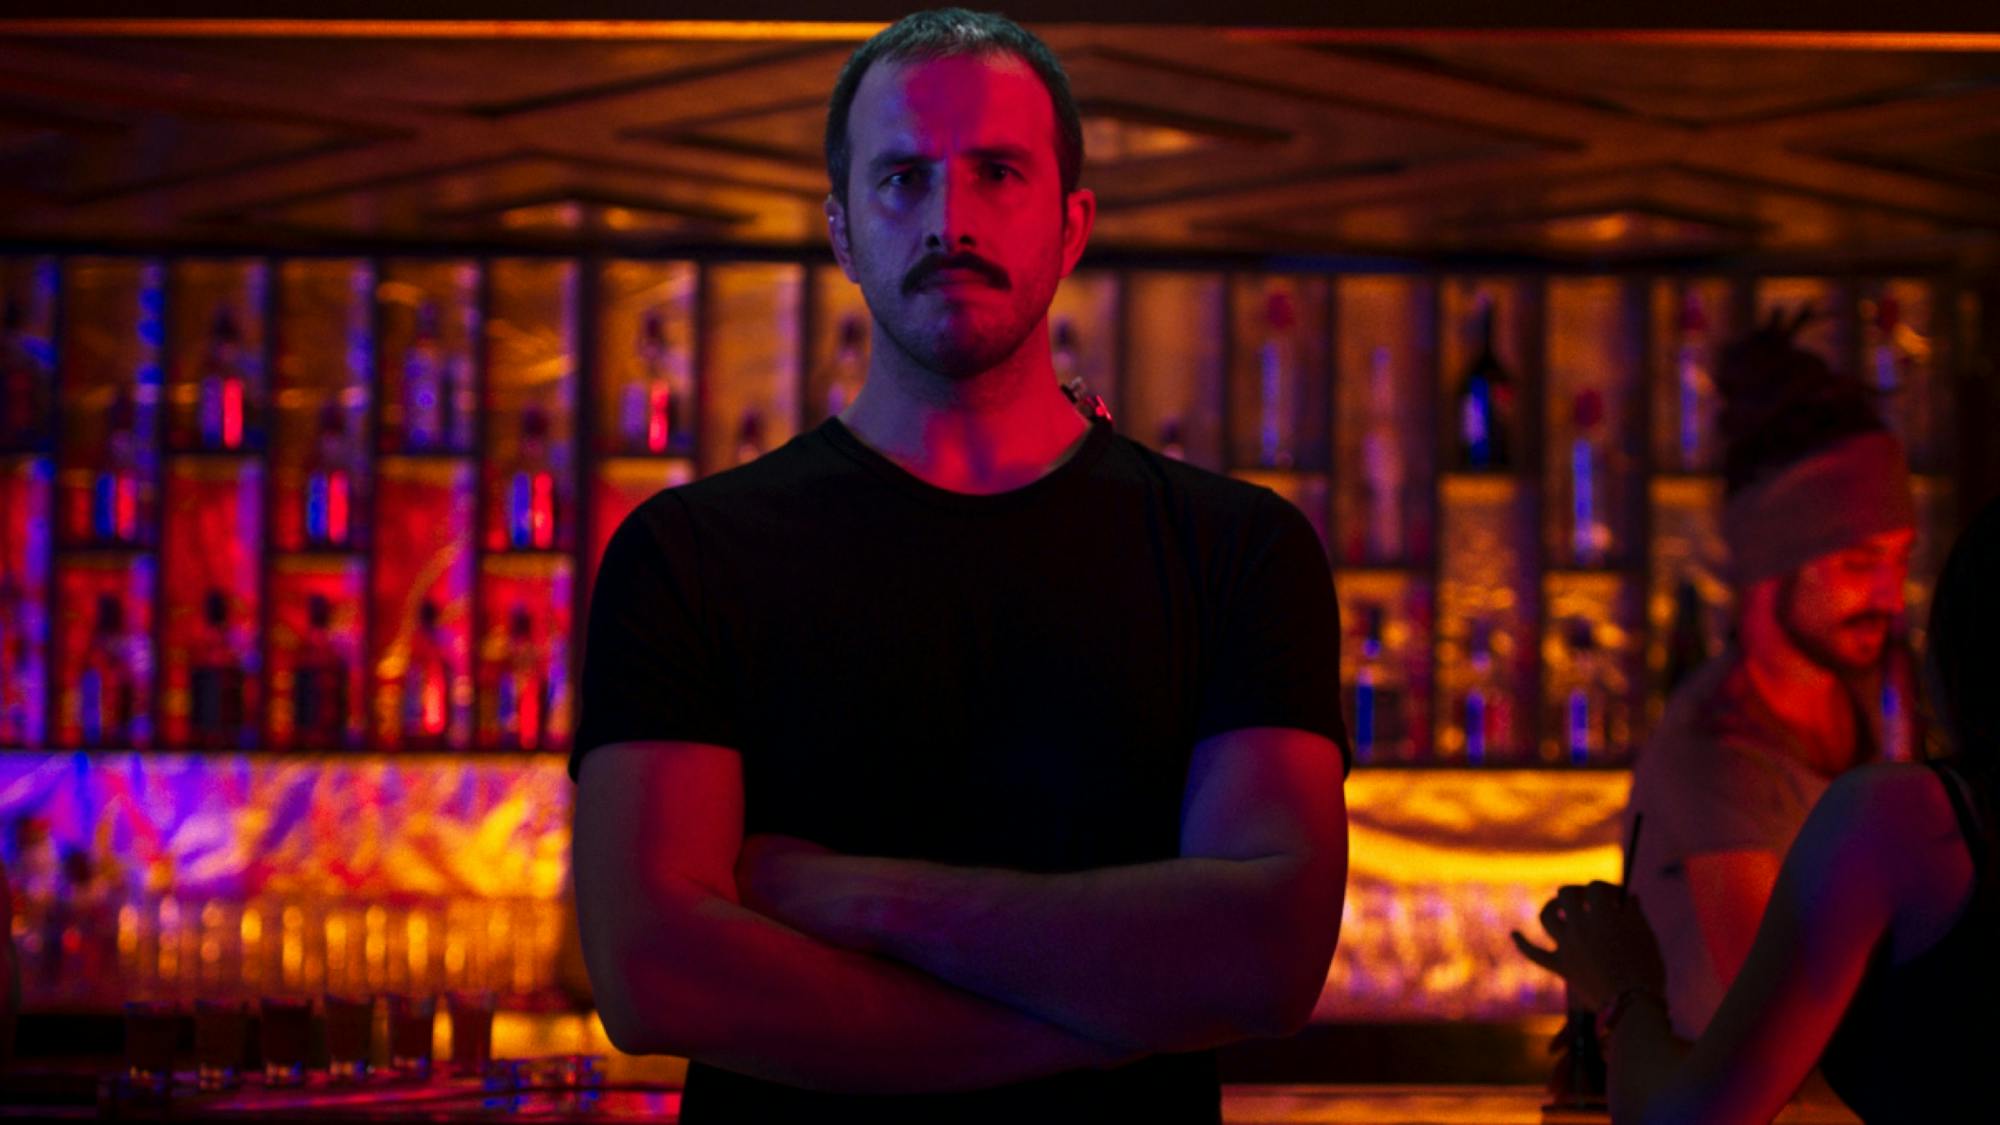 Yasin stands in front of a fashionable bar, arms crossed over a black t-shirt. The scene is cast in red, orange, and purple light.